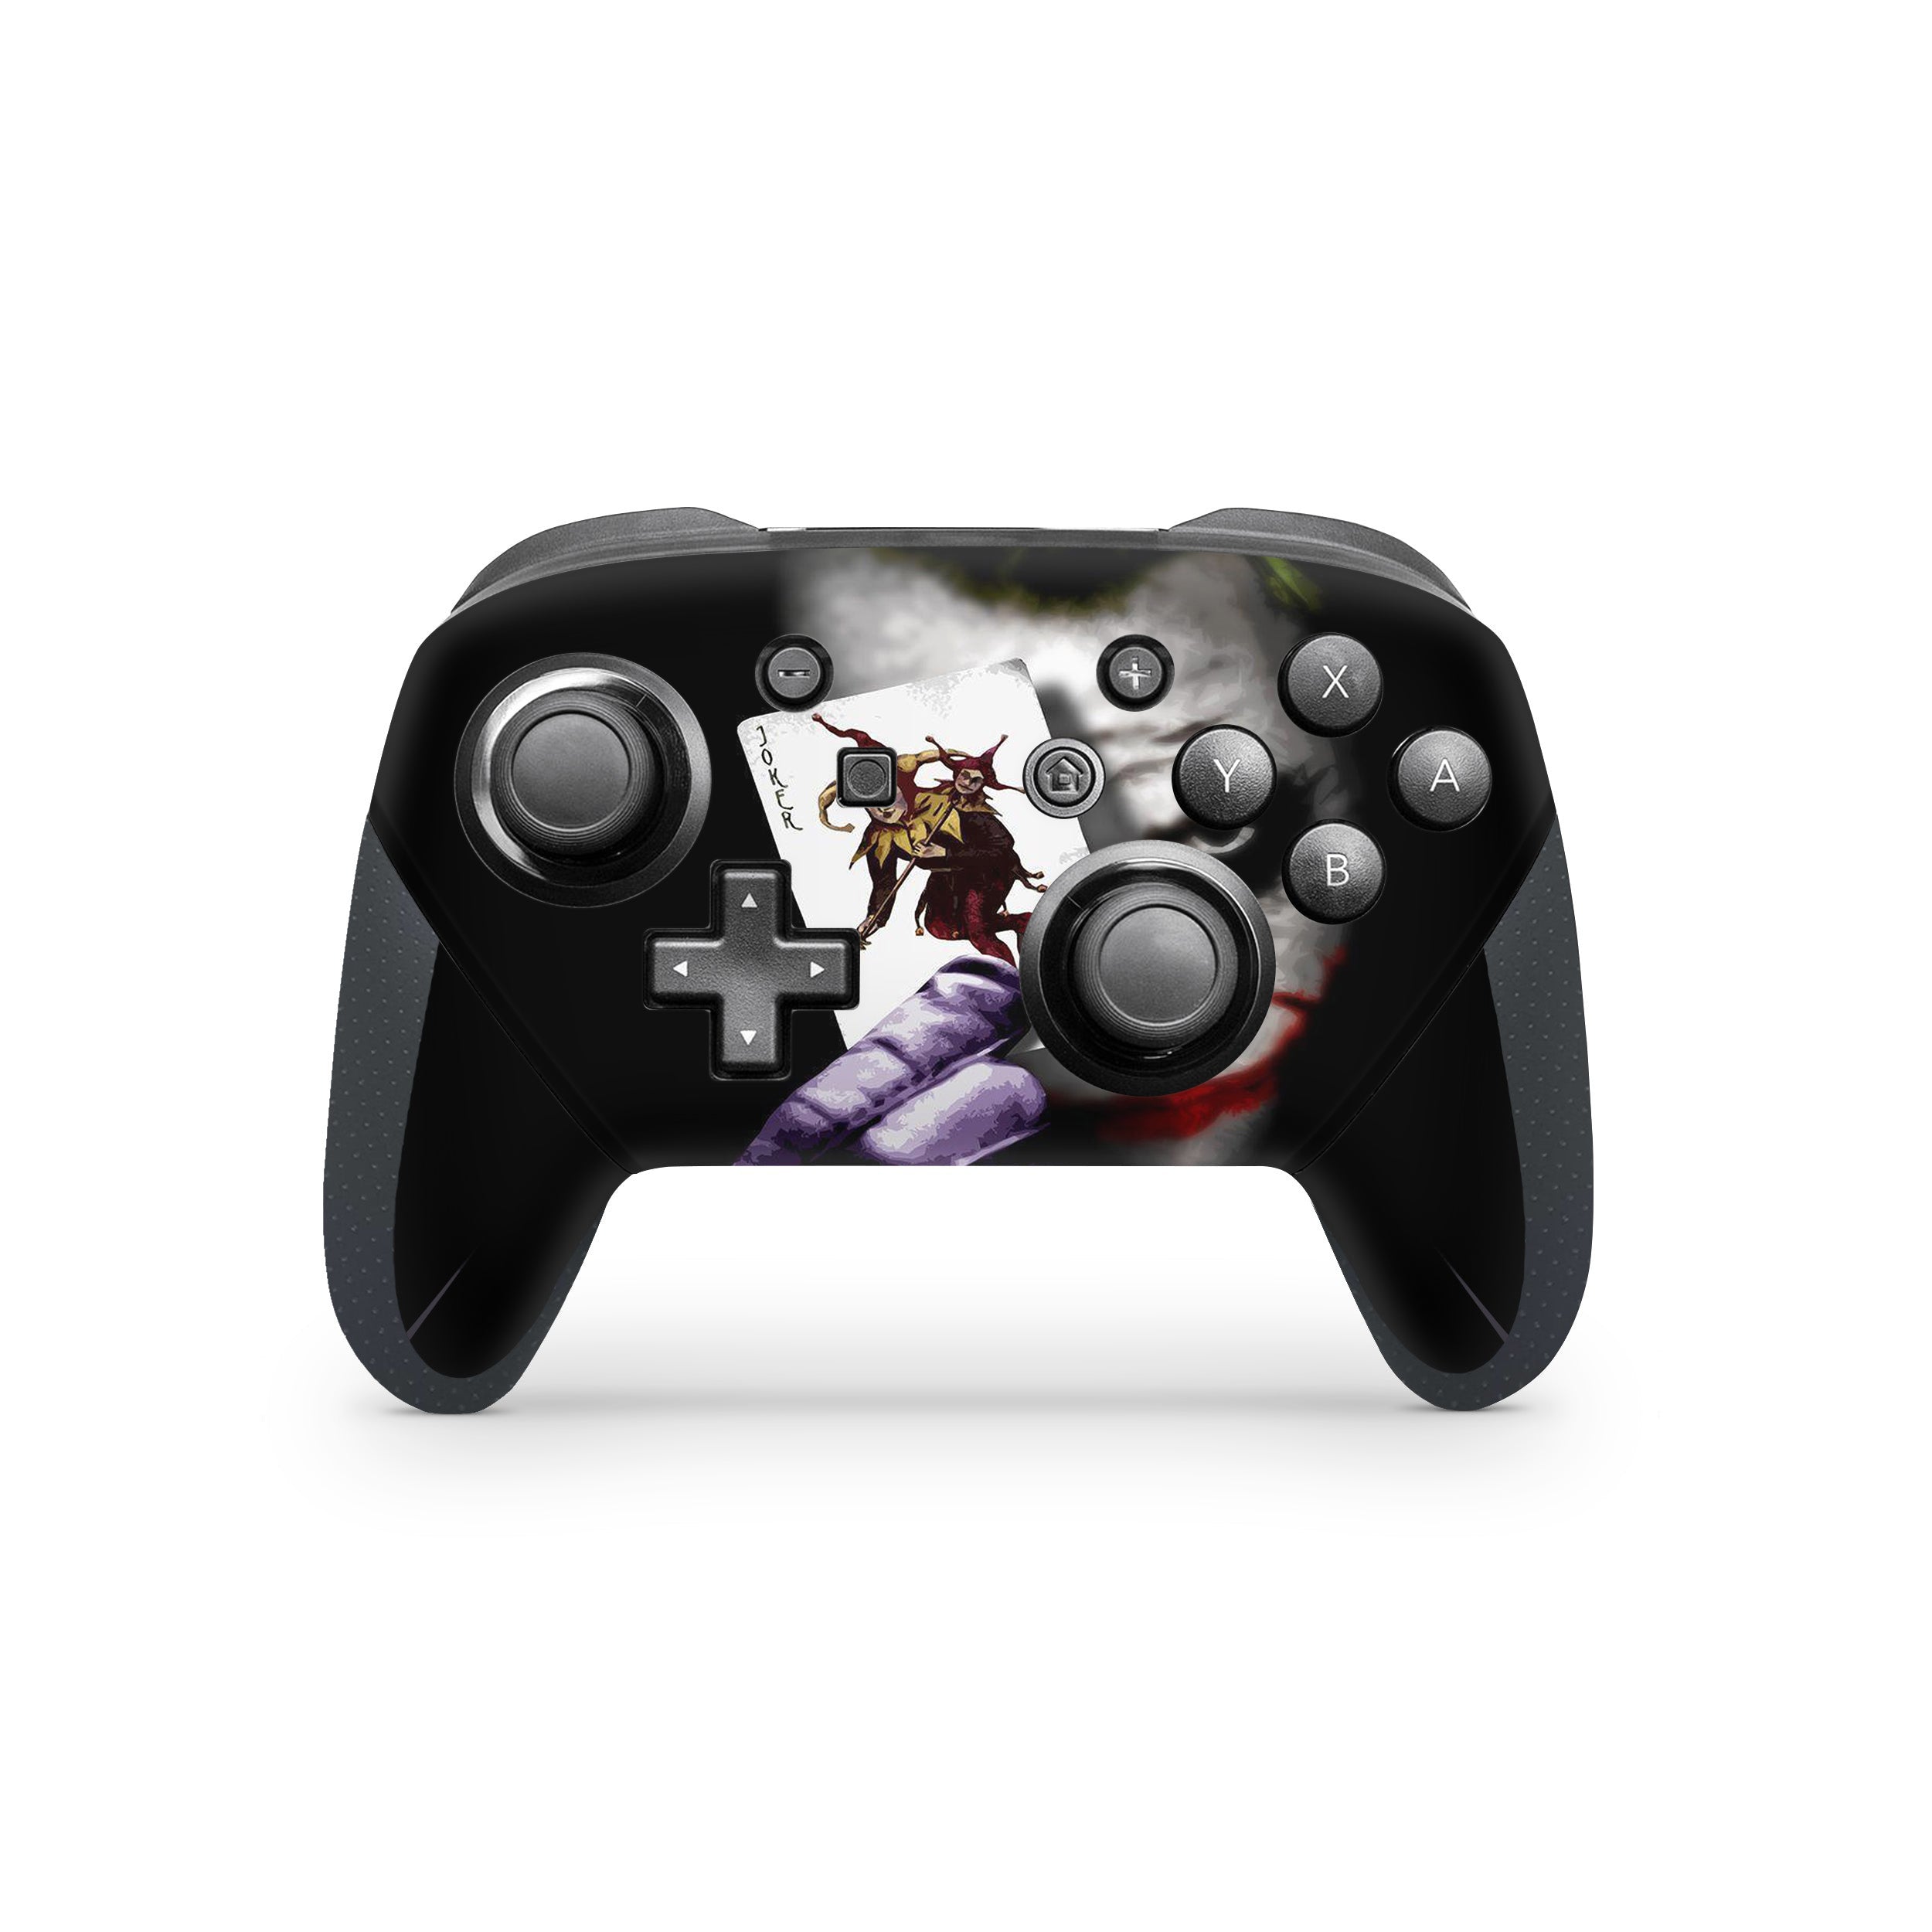 A video game skin featuring a DC Joker design for the Switch Pro Controller.